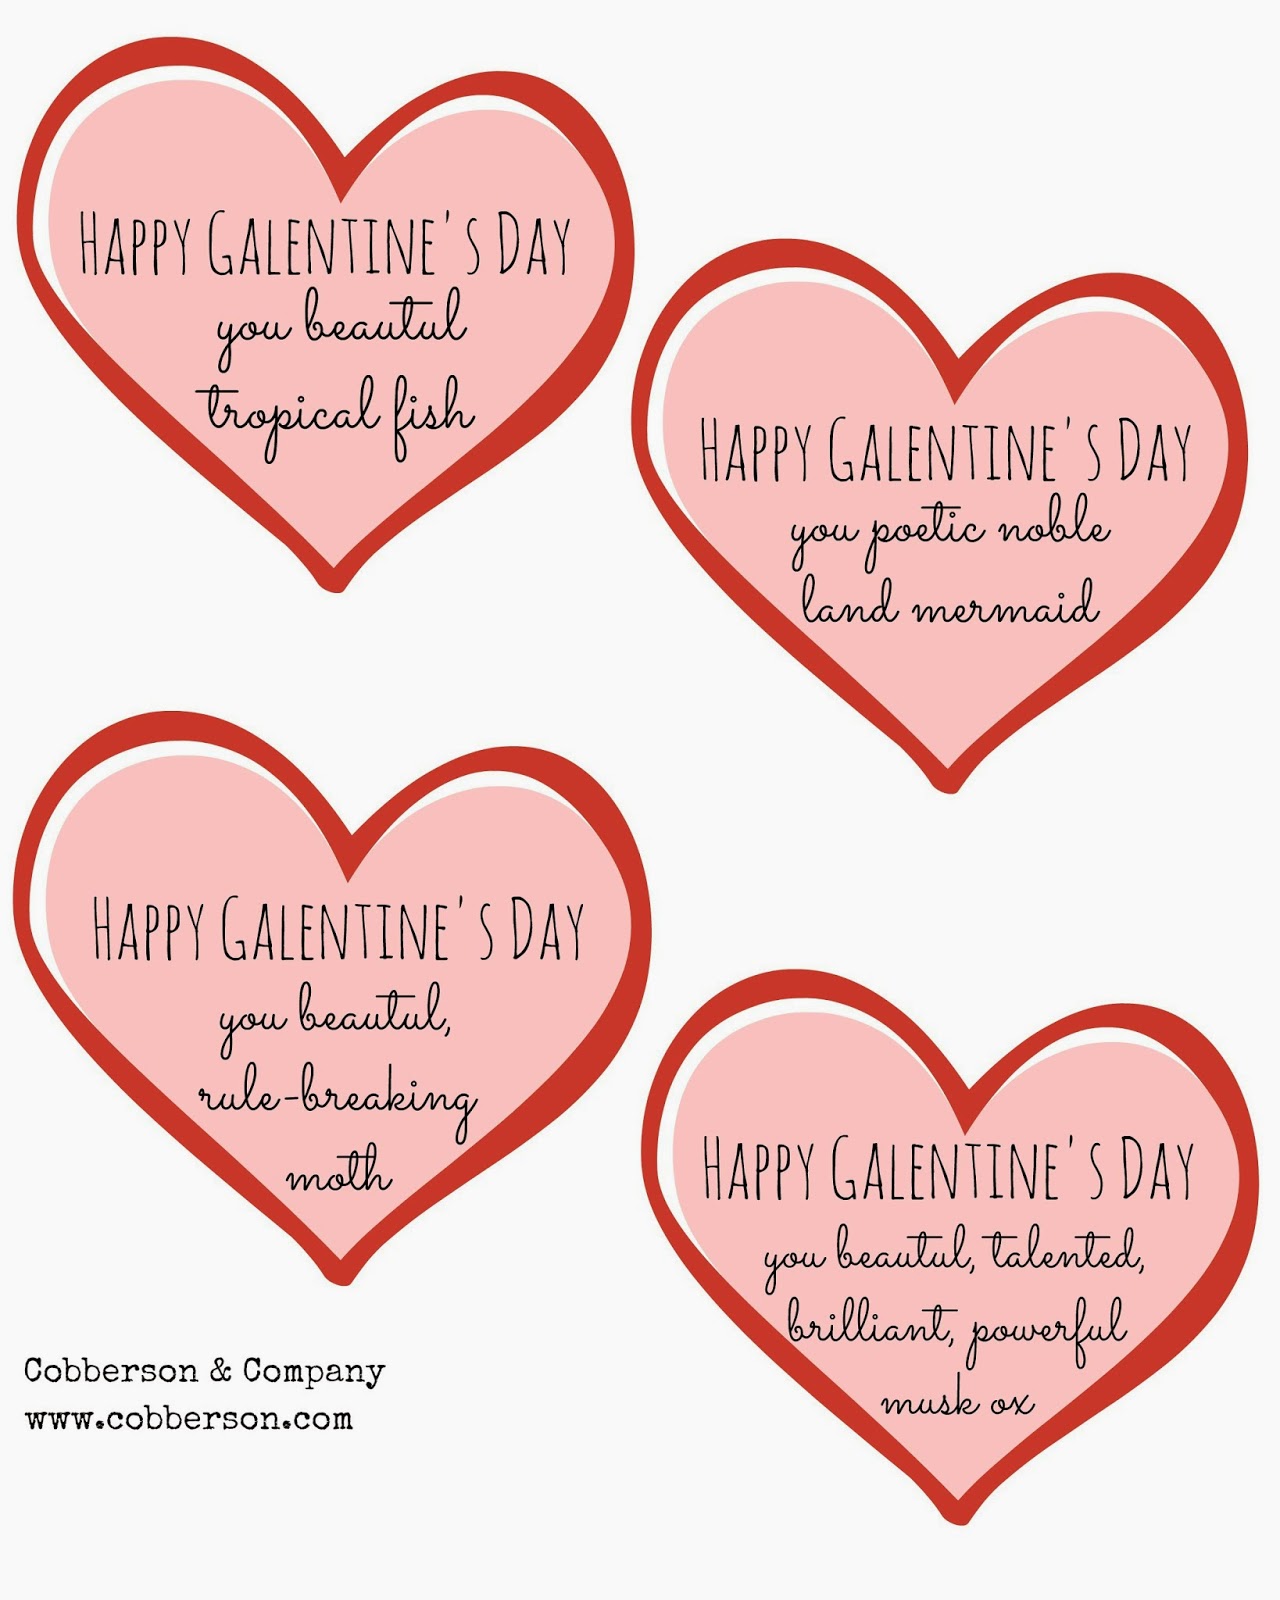 happy-galentine-s-day-you-noble-diyer-free-printable-cobberson-co